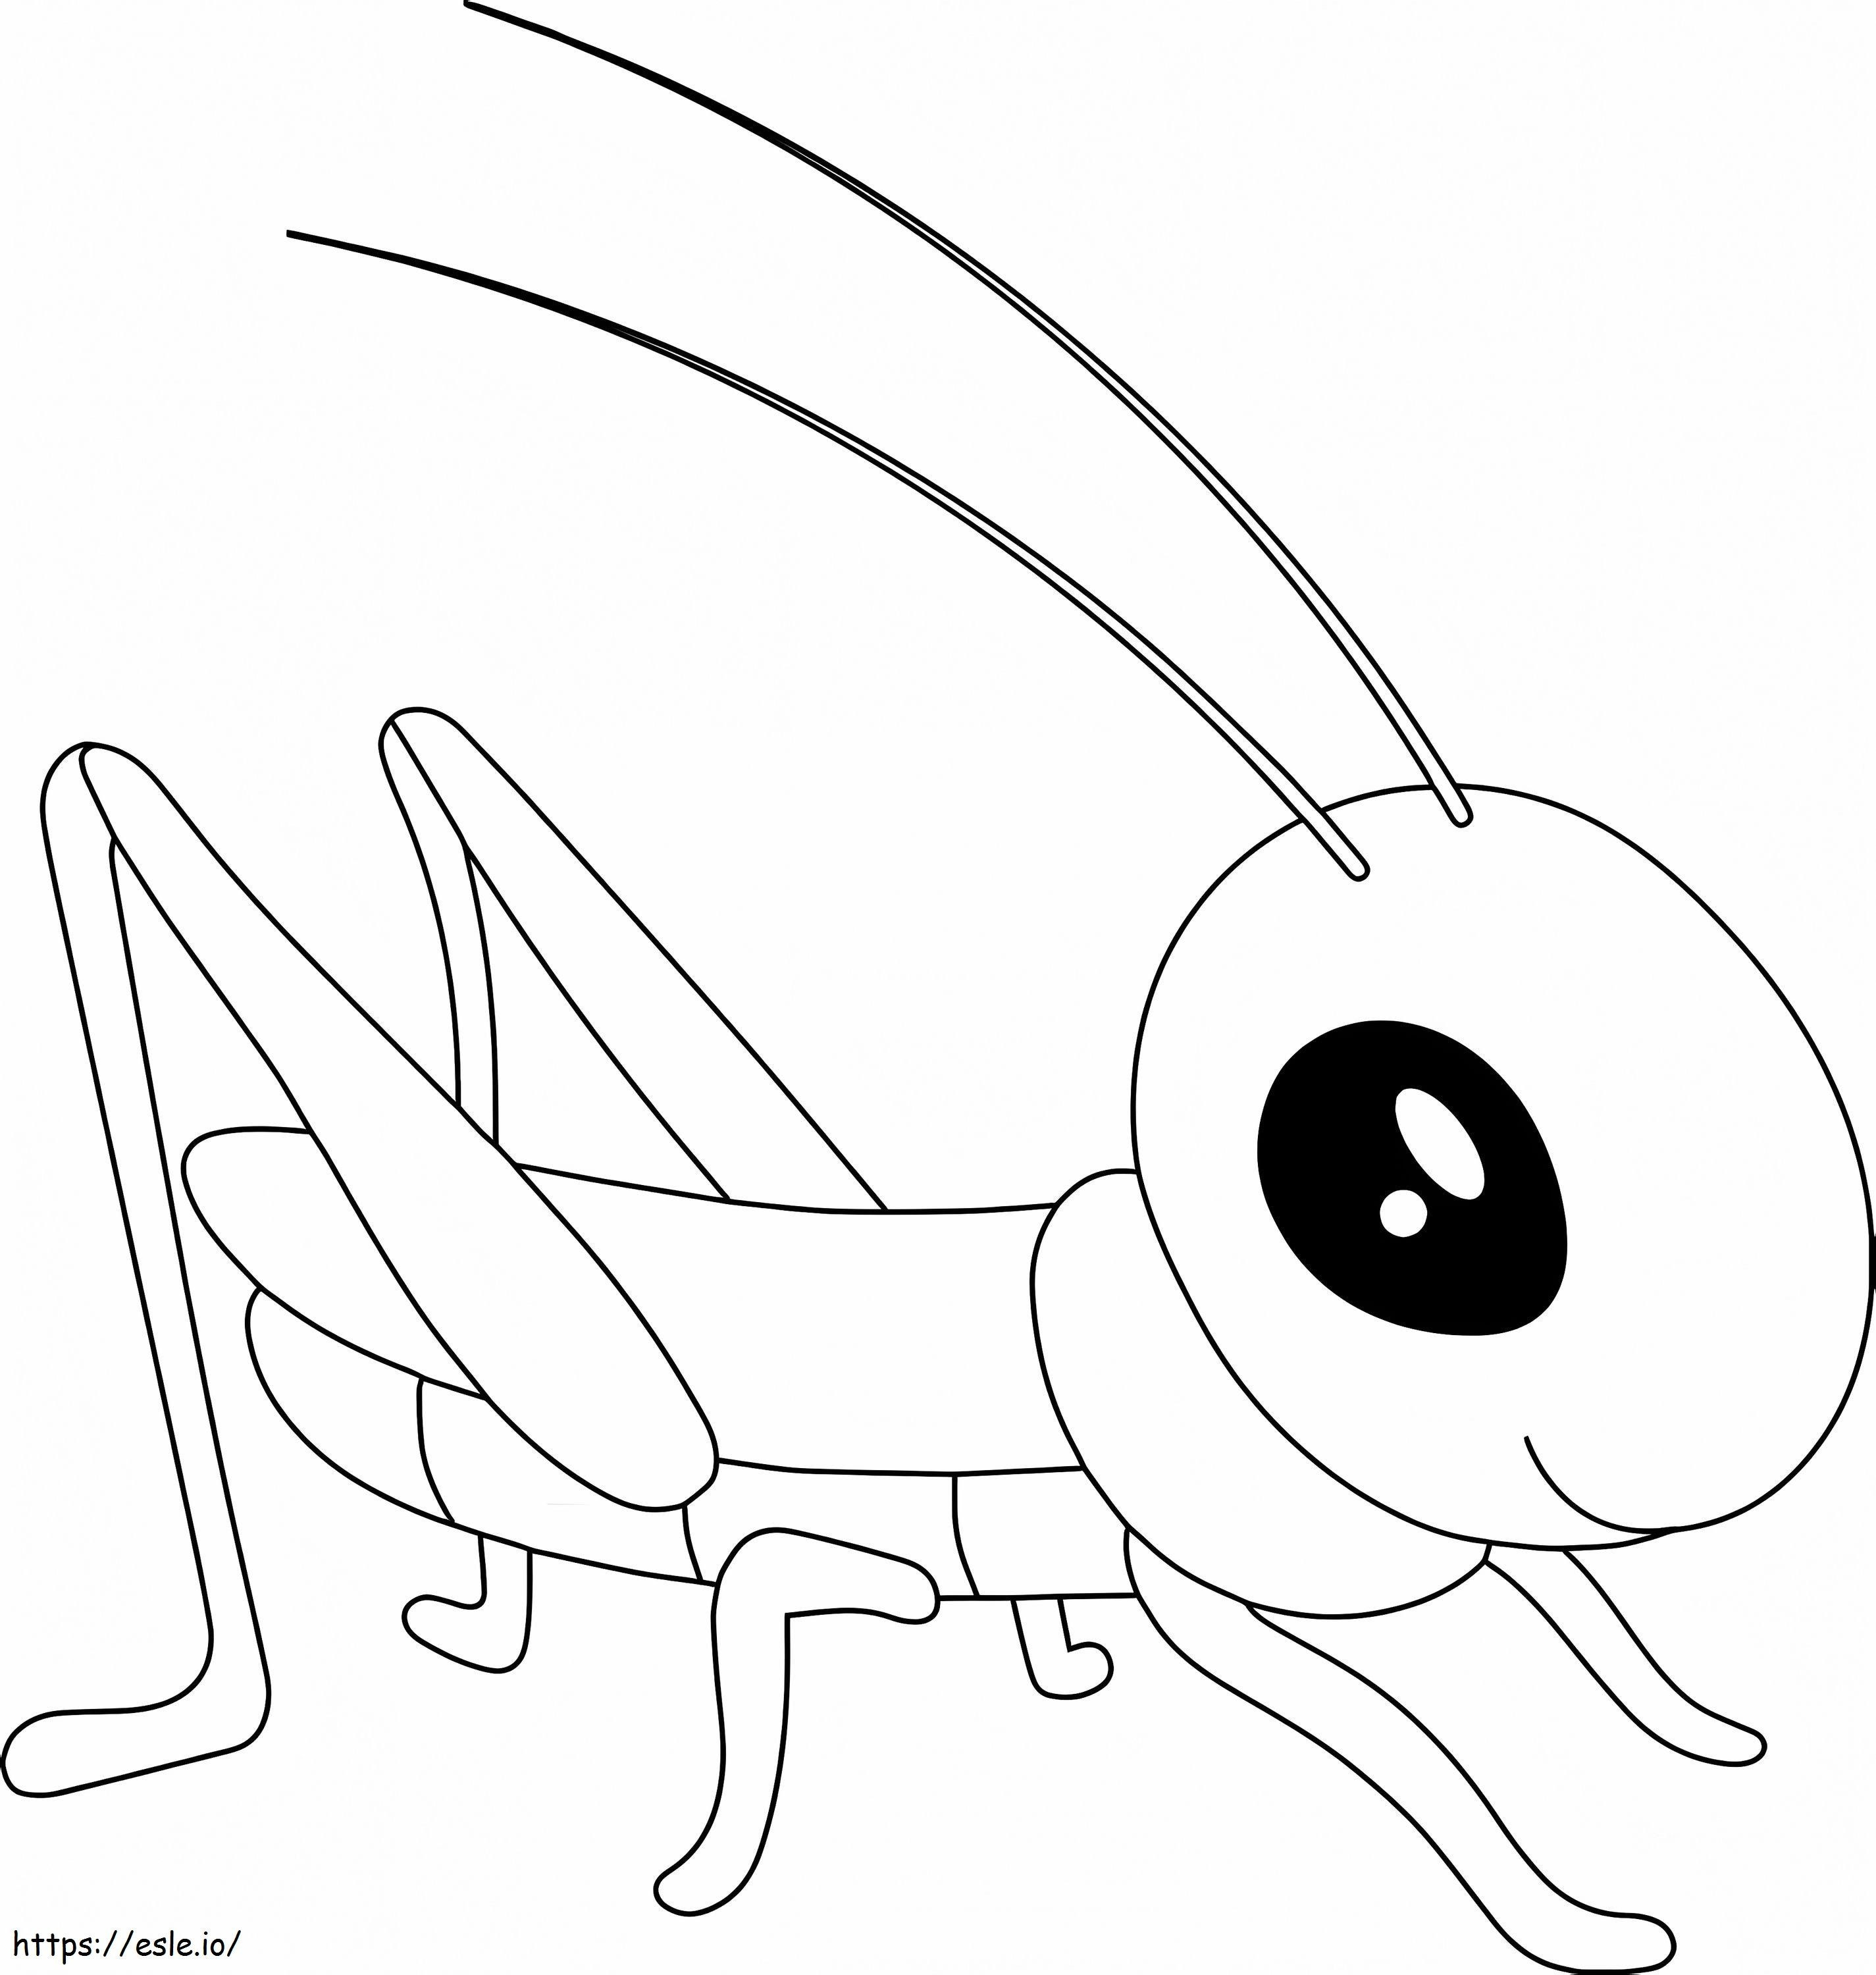 Grasshopper Smiling coloring page